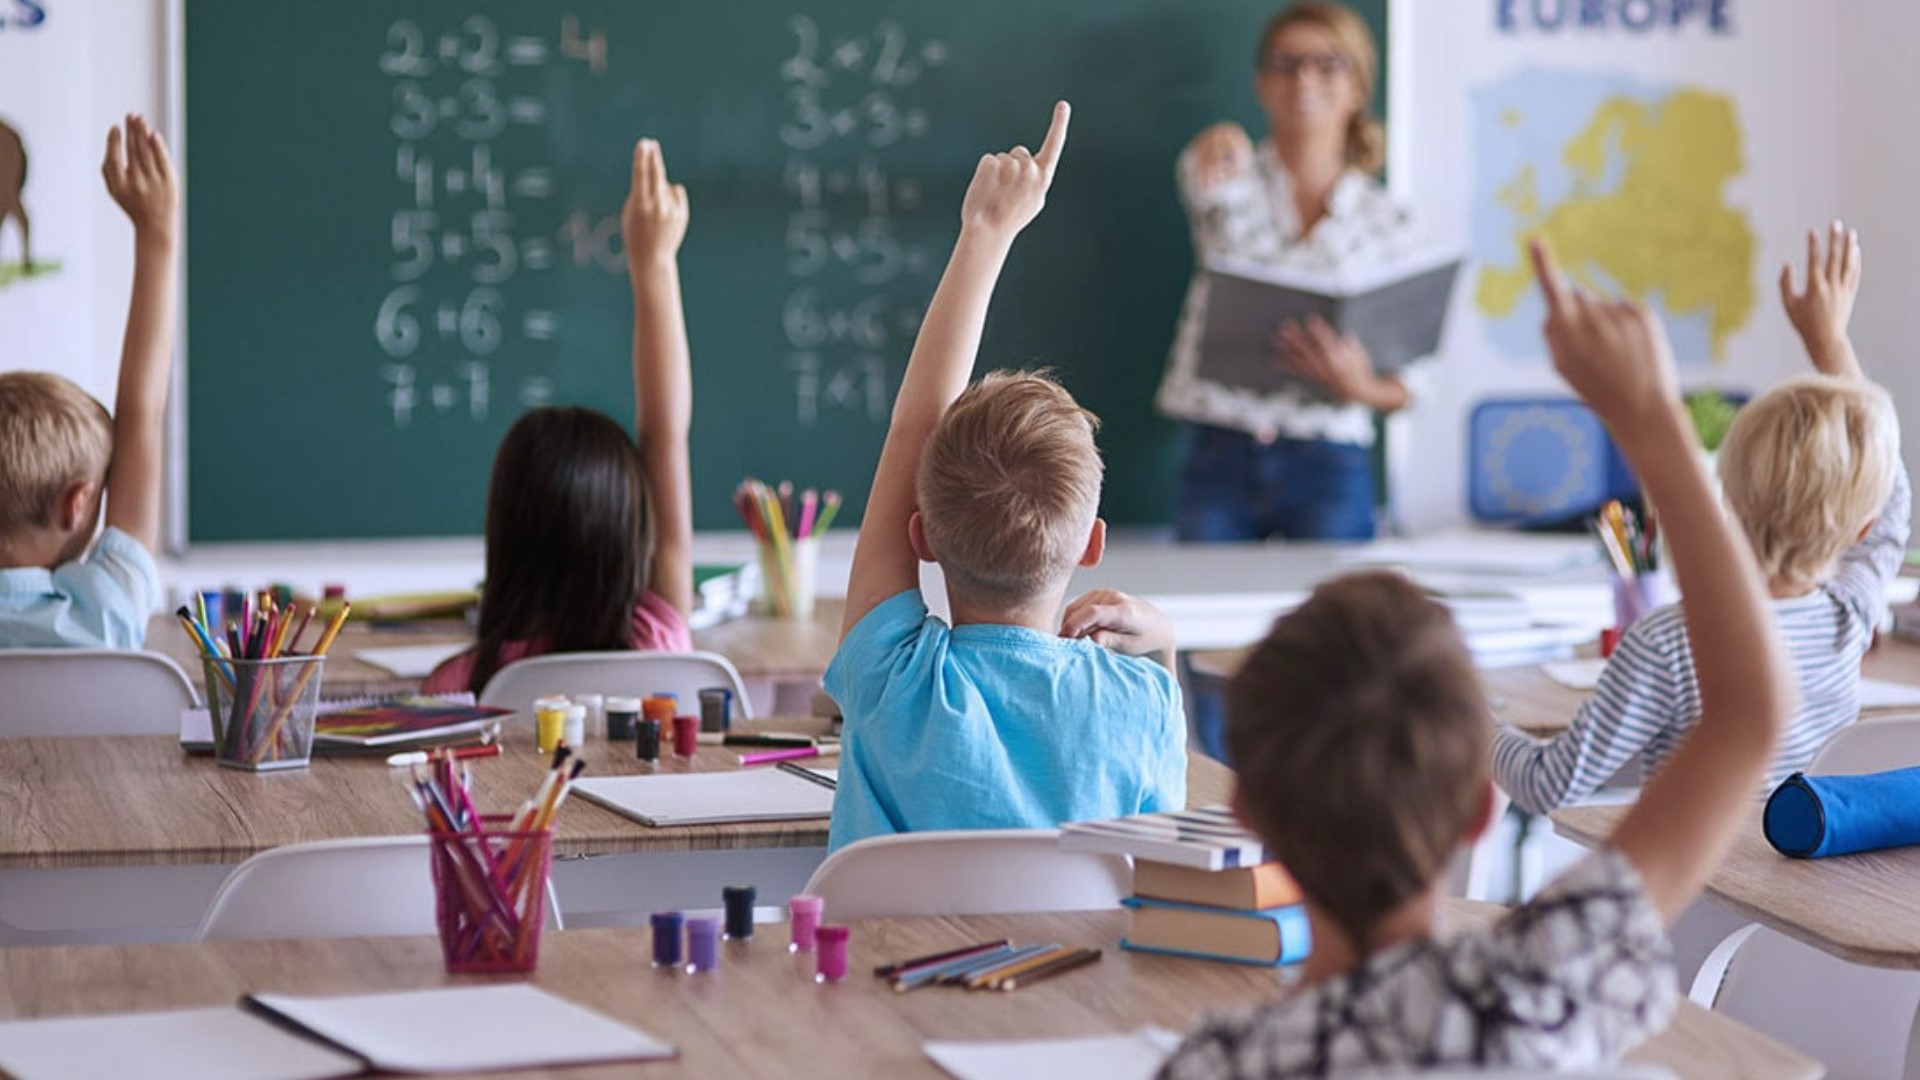 55% of teachers said they were planning to leave the profession early due to the COVID-19 pandemic, according to a survey from the National Education Association.